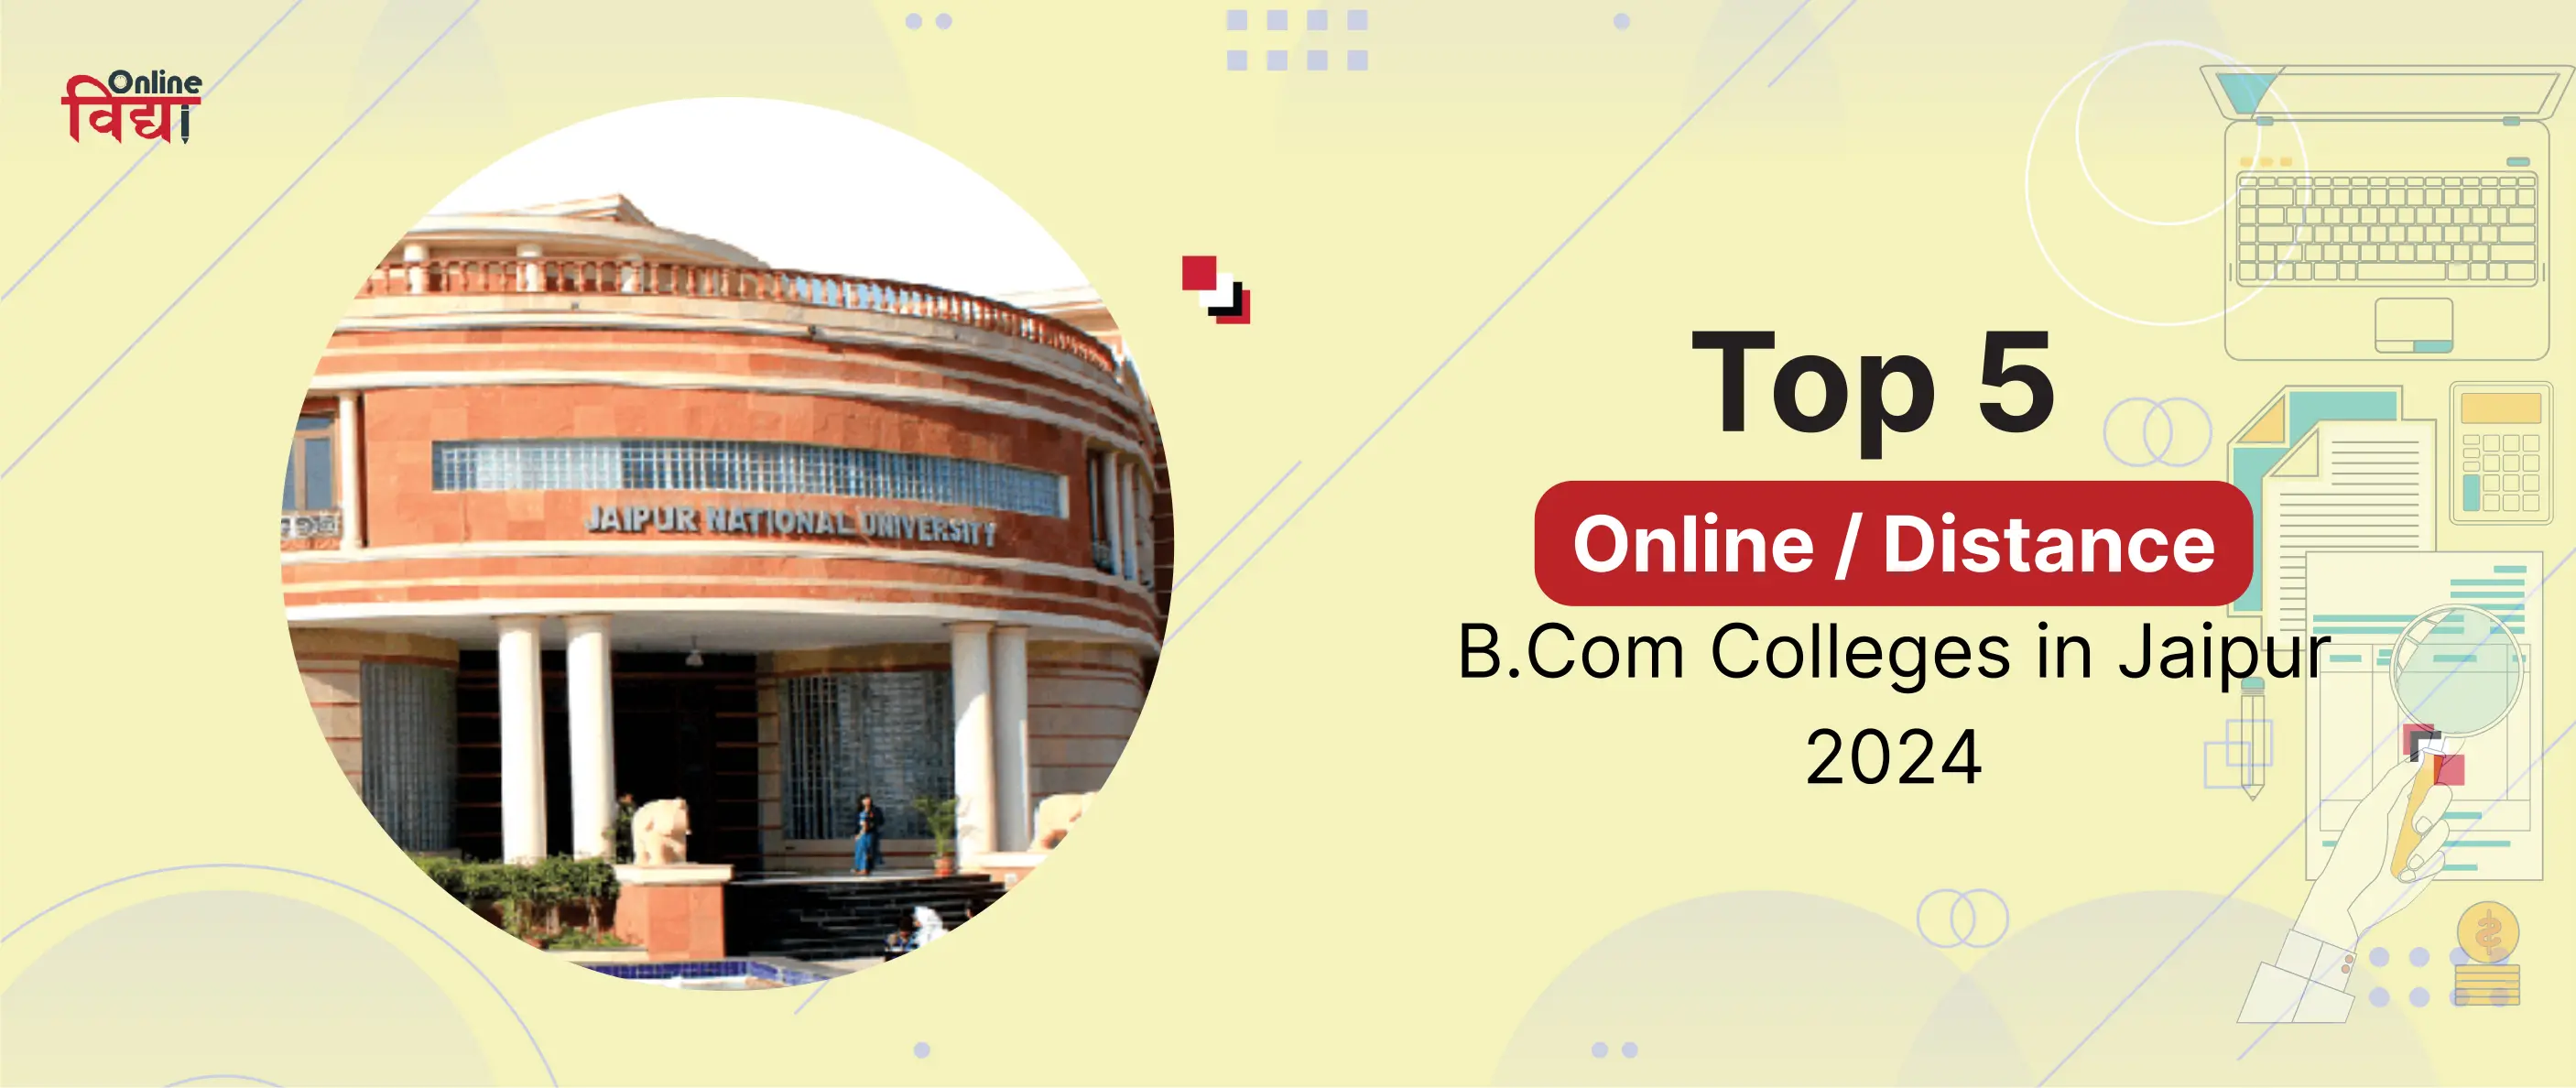 Top 5 Online/ Distance B.Com Colleges in Jaipur 2024